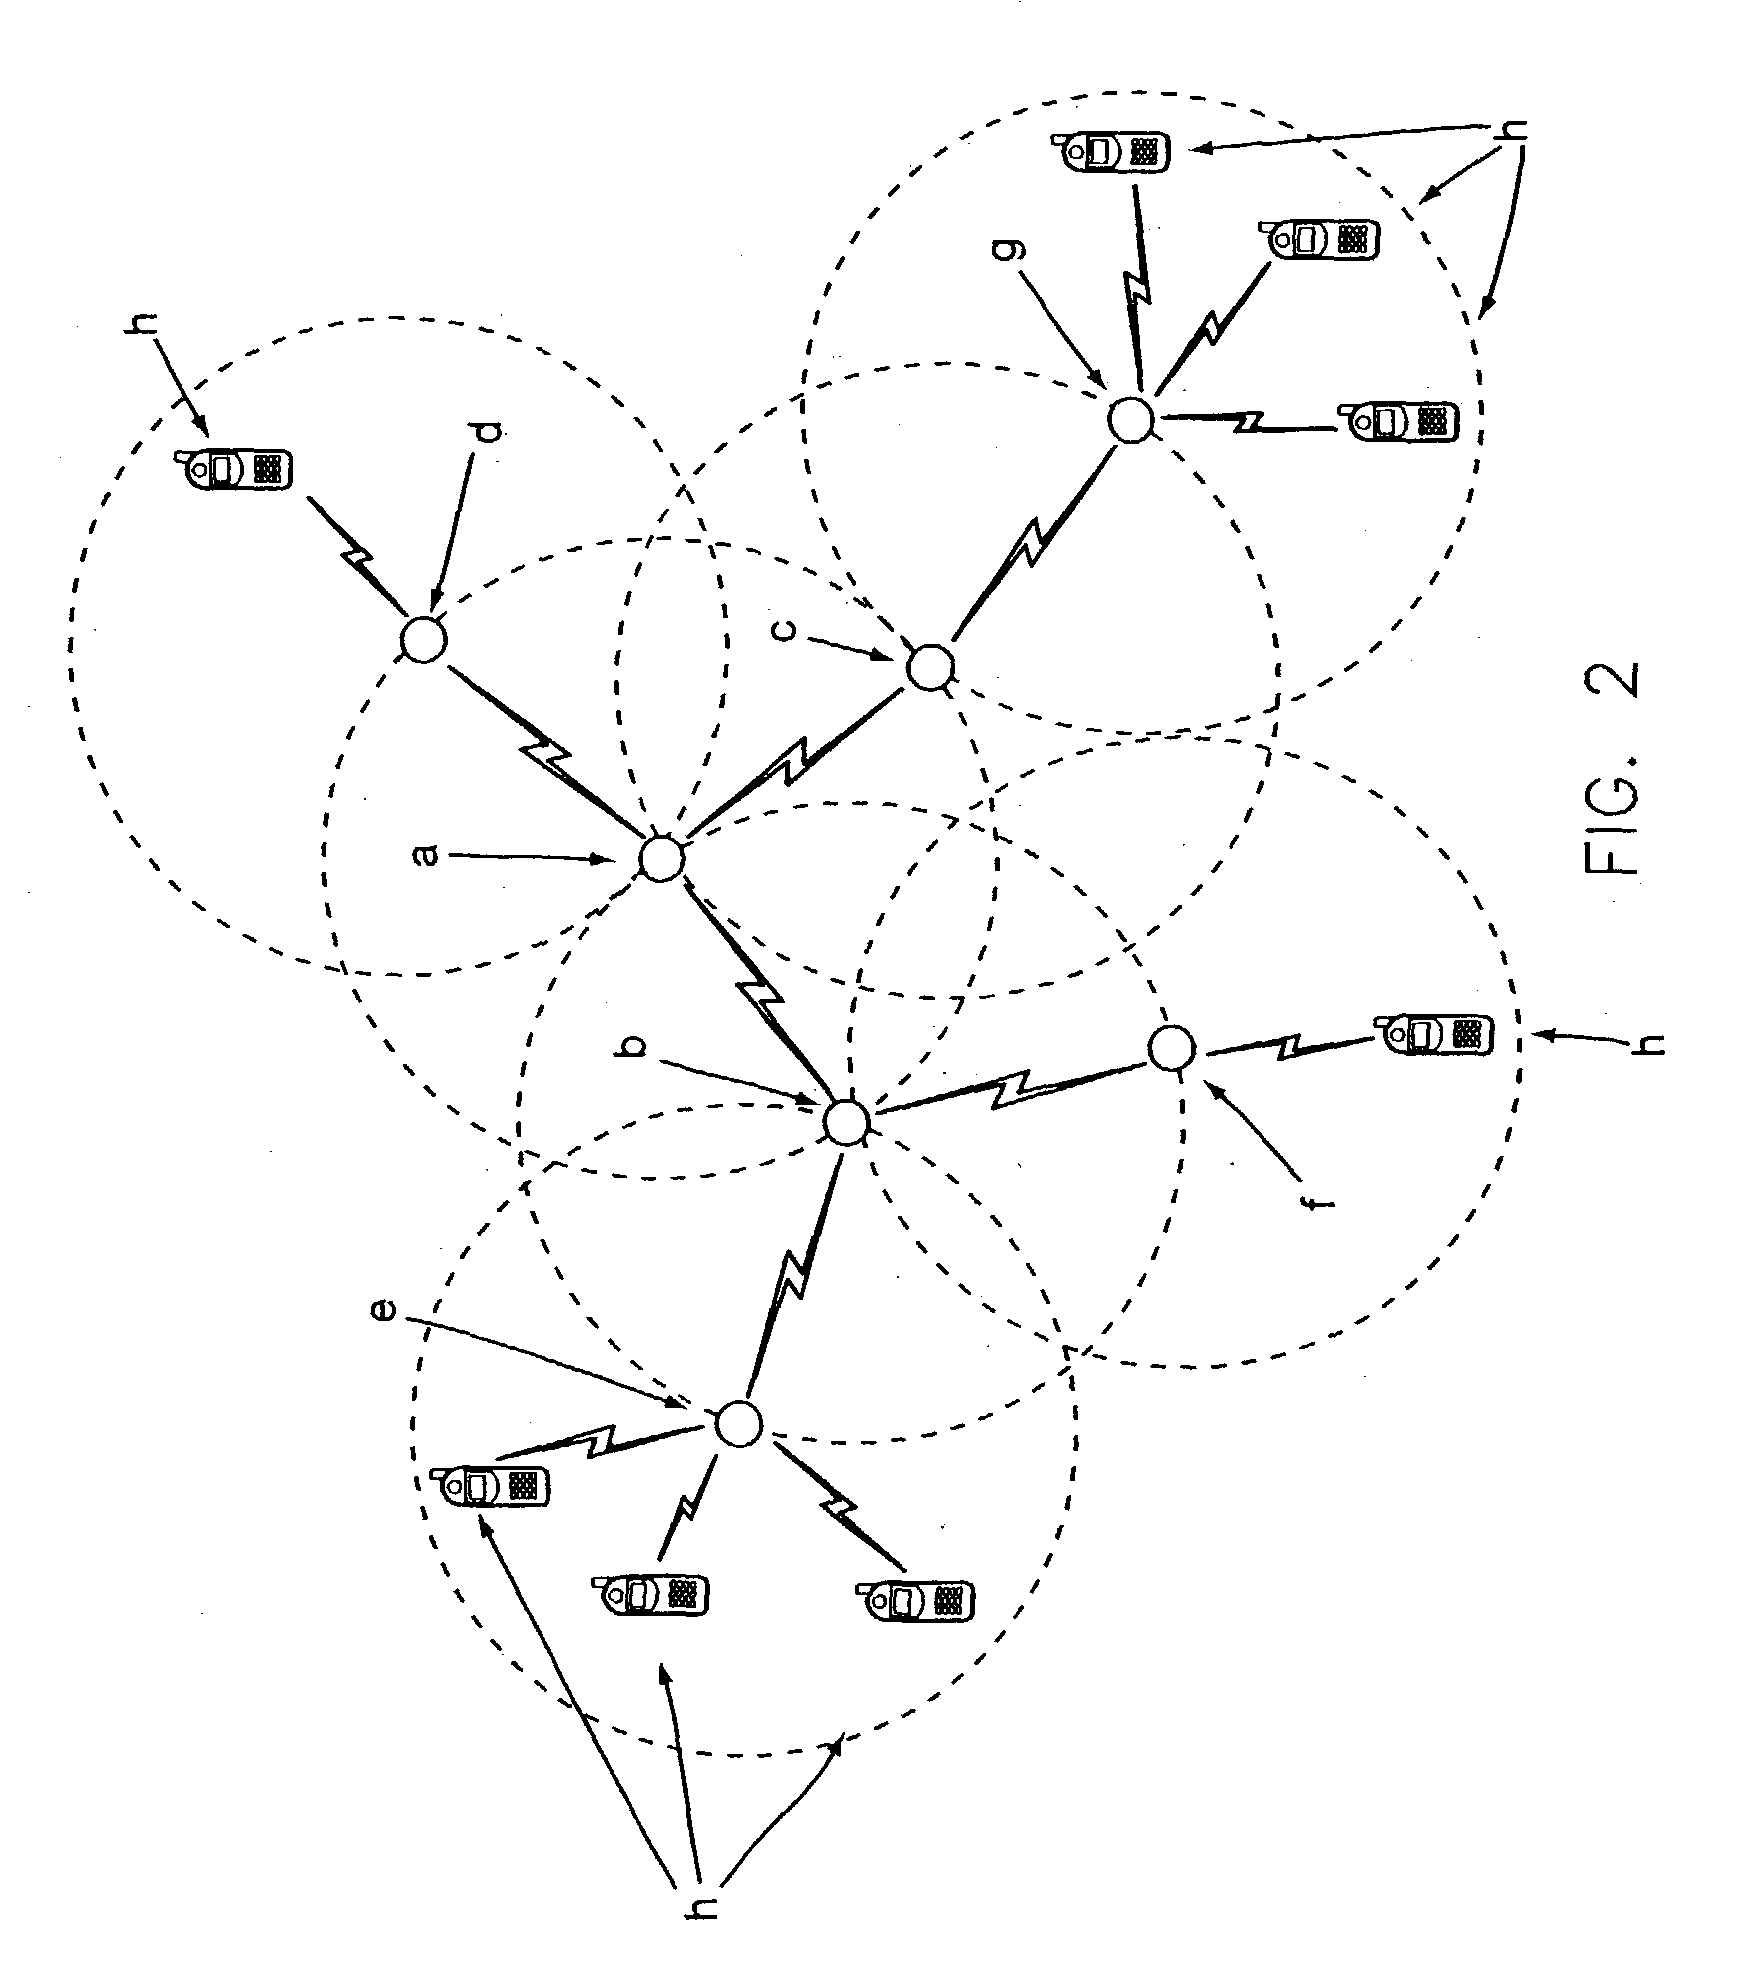 Point coordinator control passing scheme using a scheduling information parameter set for an IEEE 802.11 wireless local area network